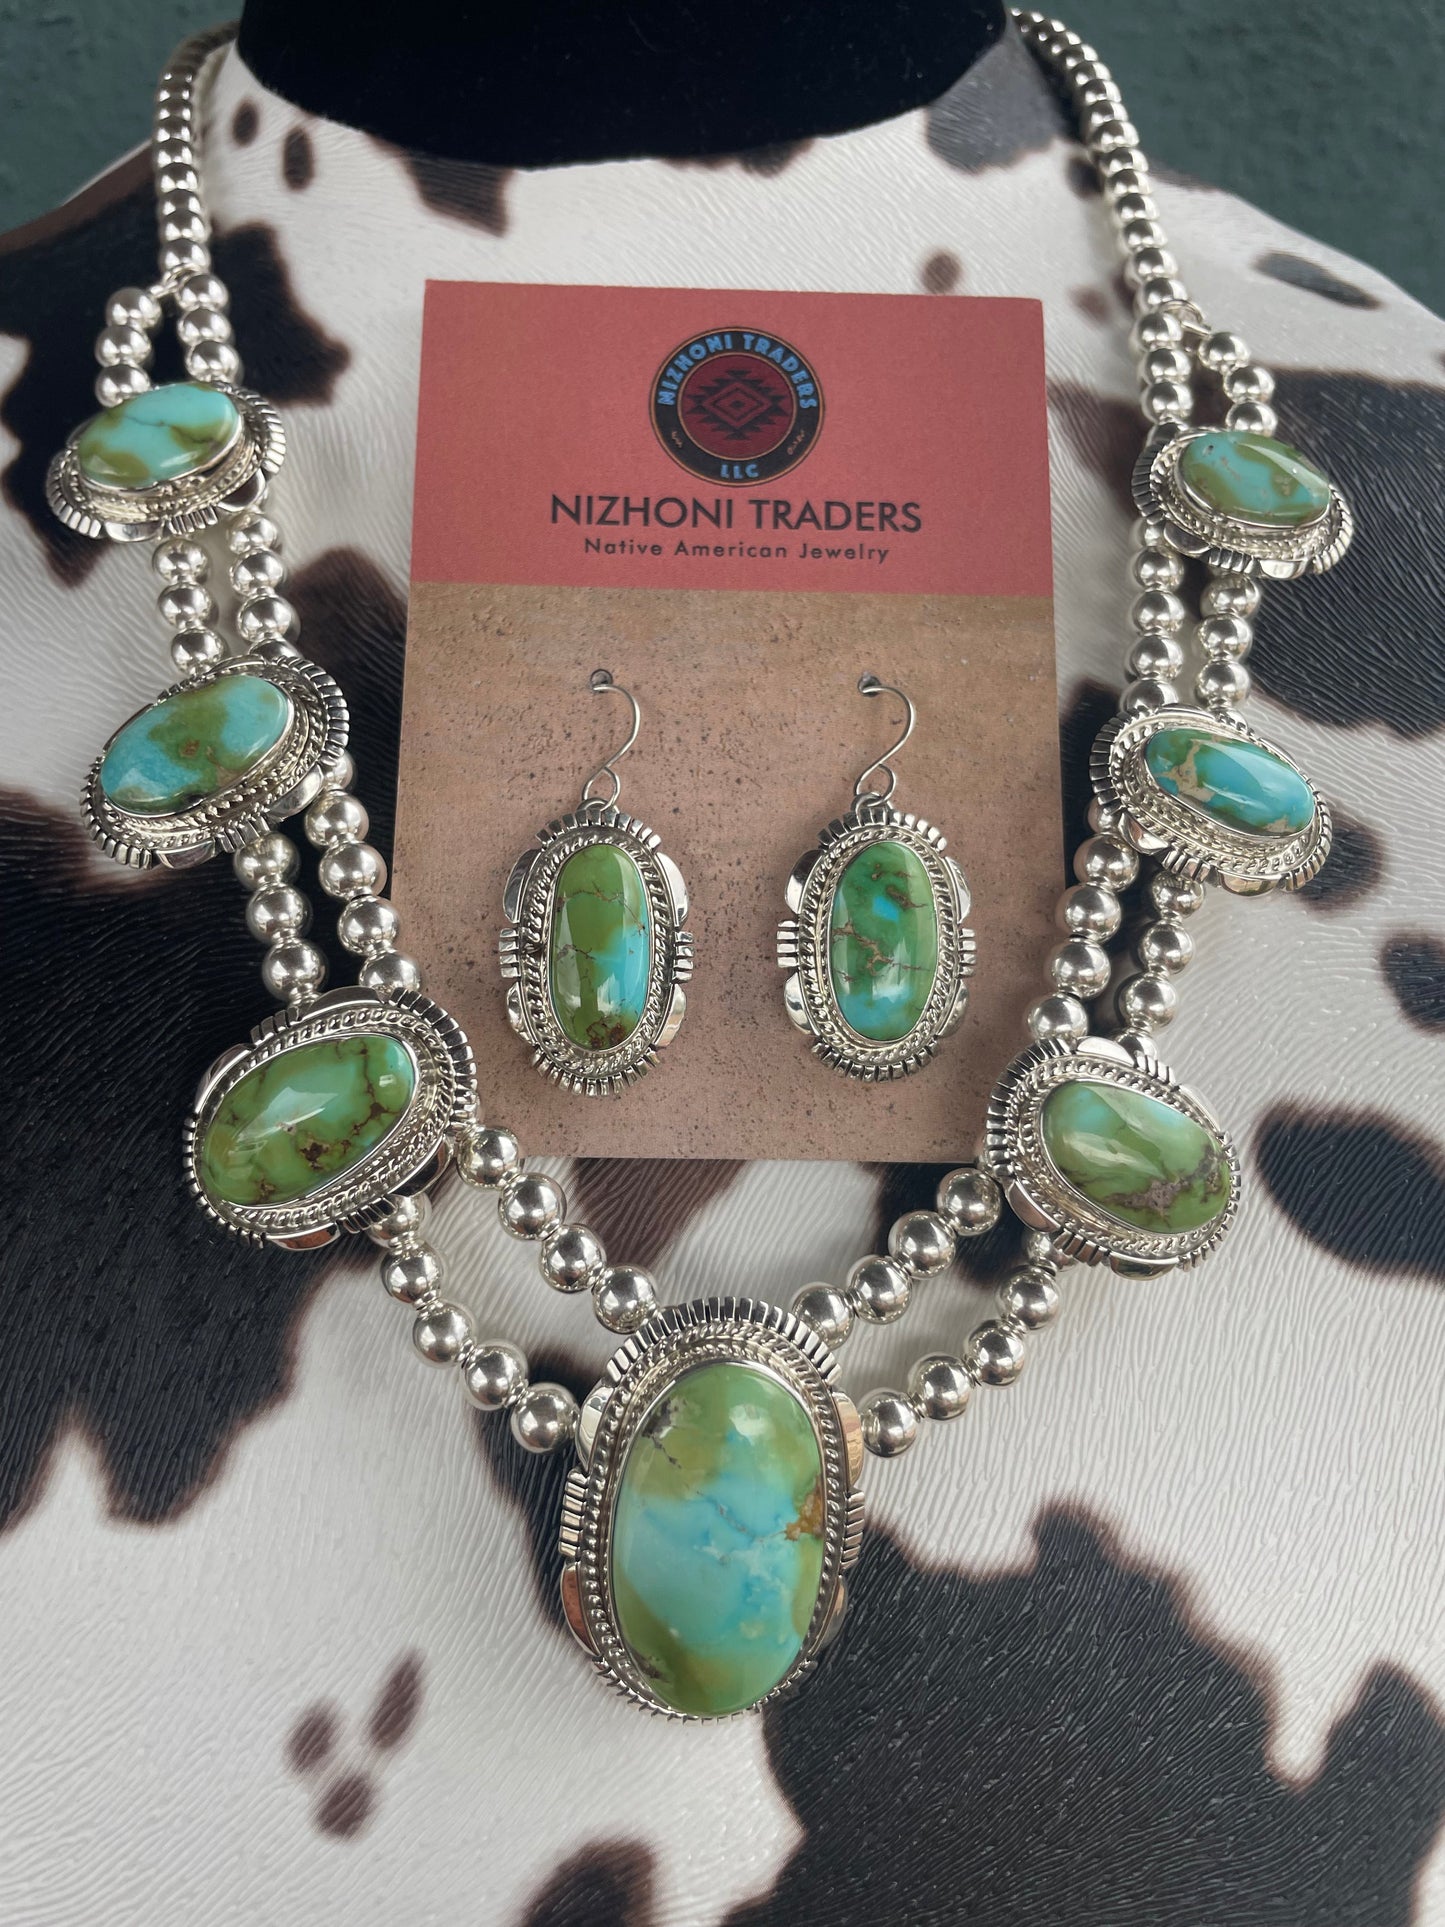 Beautiful Navajo Sterling Silver Sonoran Mountain Turquoise Necklace & Earring Set